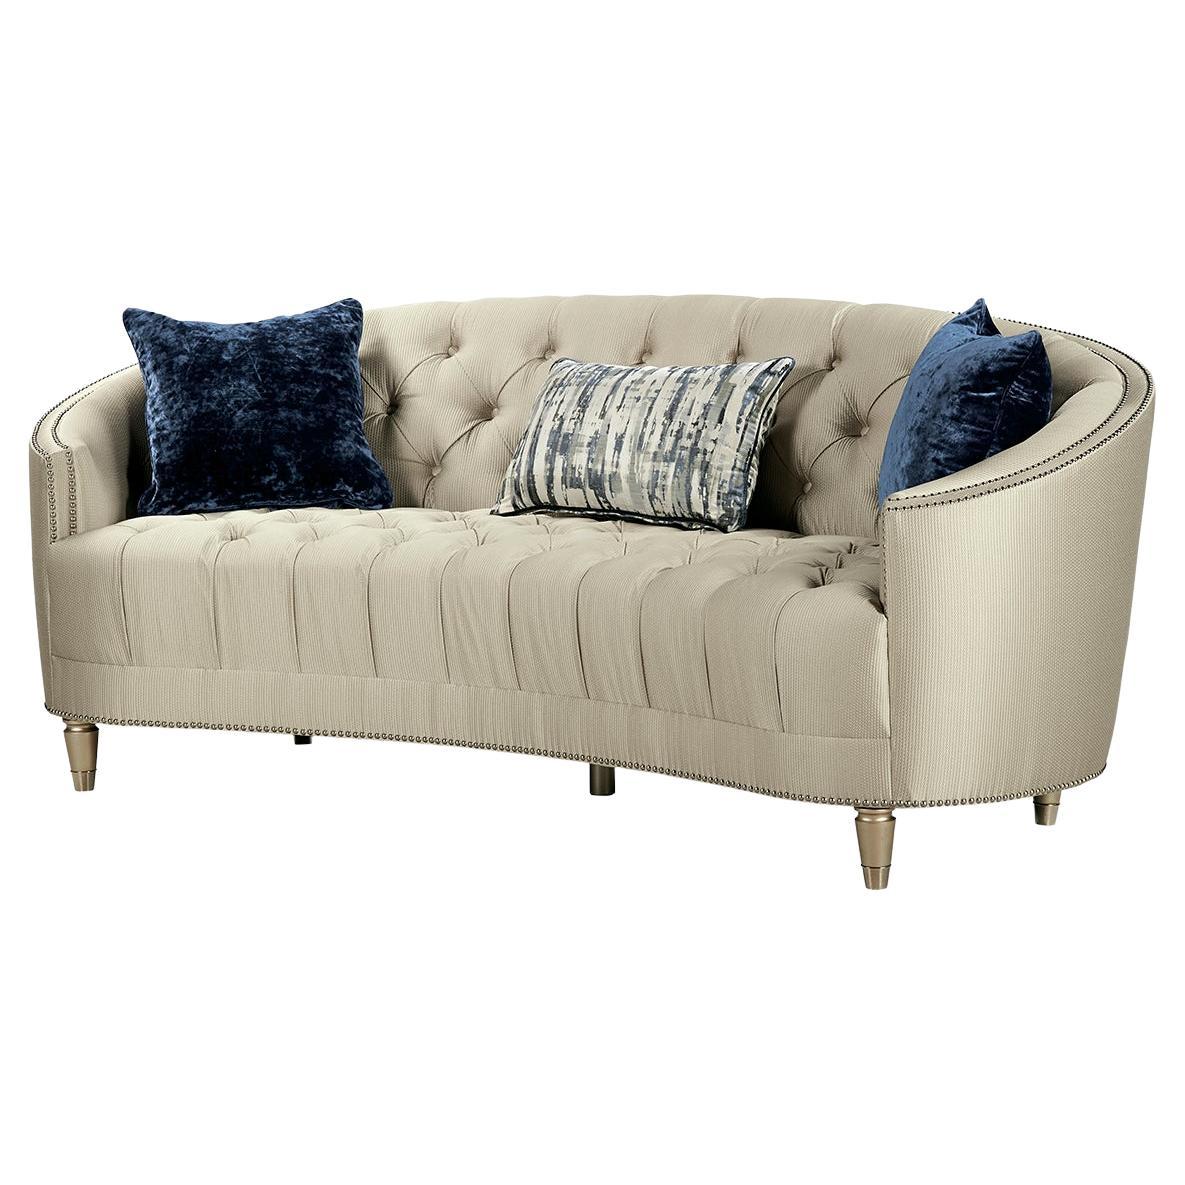 Tufted Curved Back Sofa